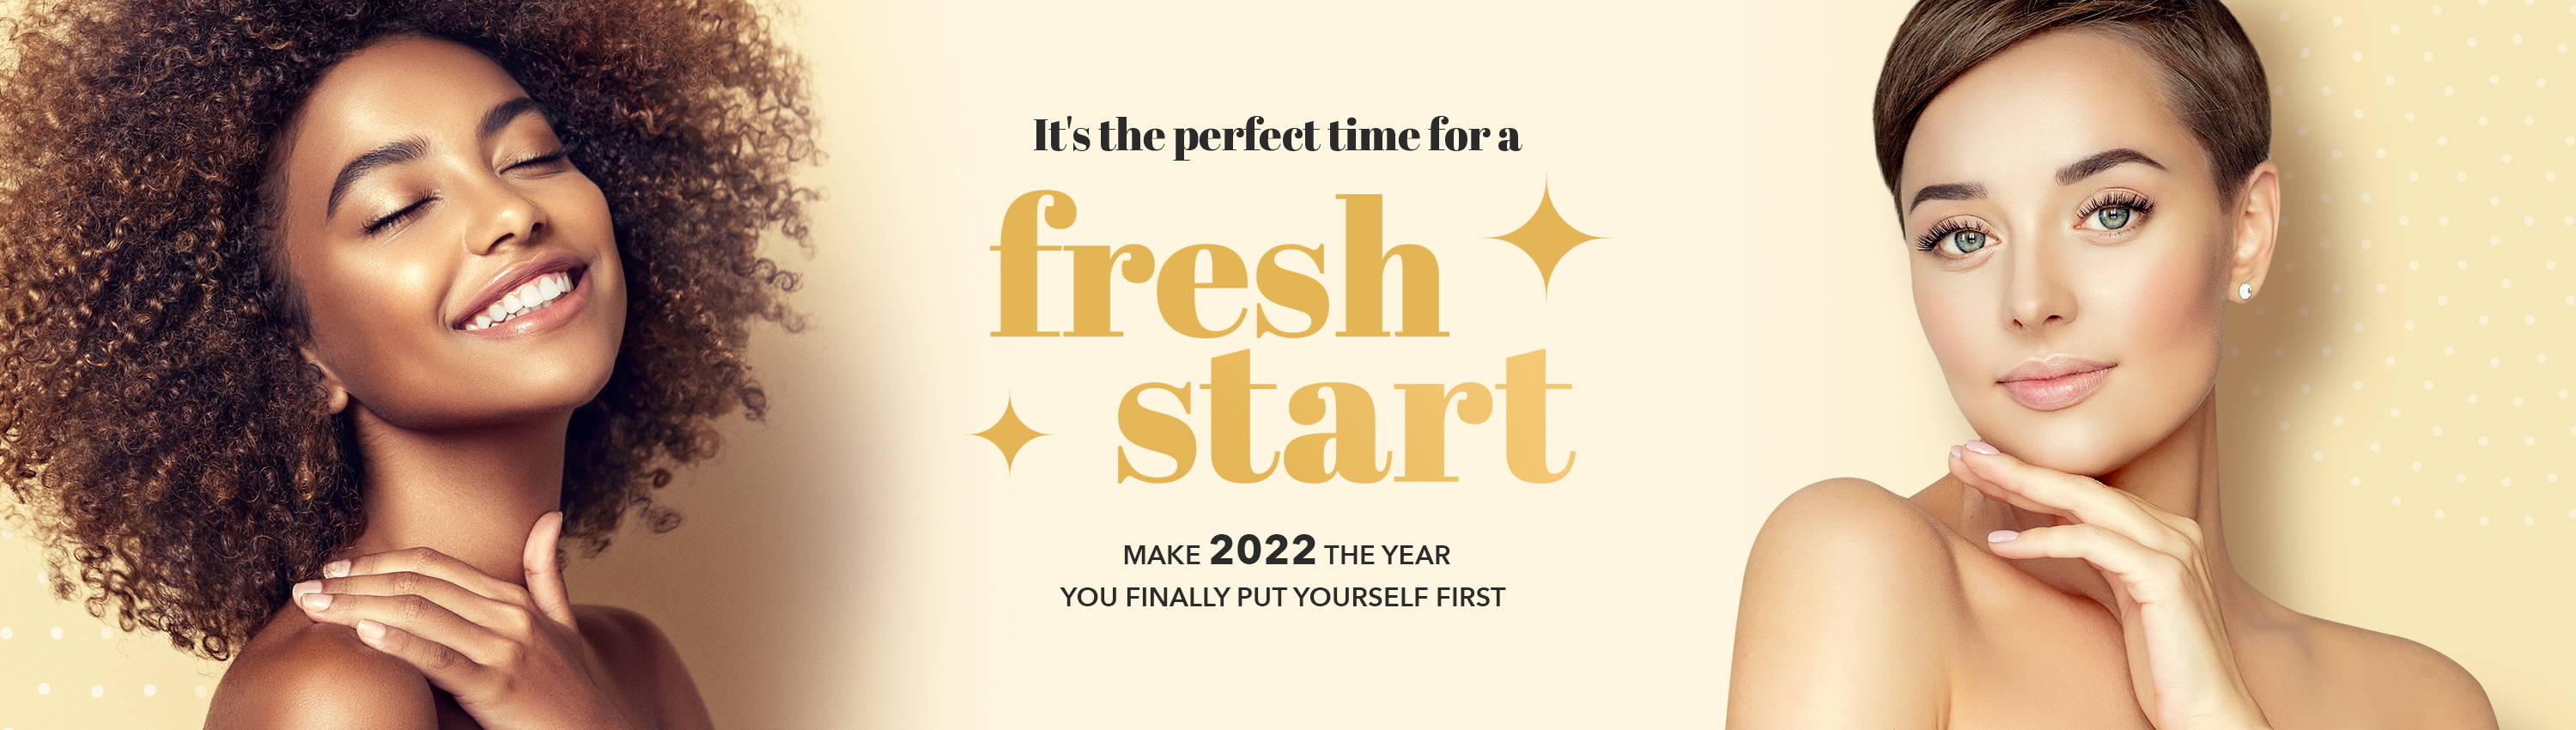 It's the perfect time for a fresh start | Make 2022 the year you finallly put yourself first!